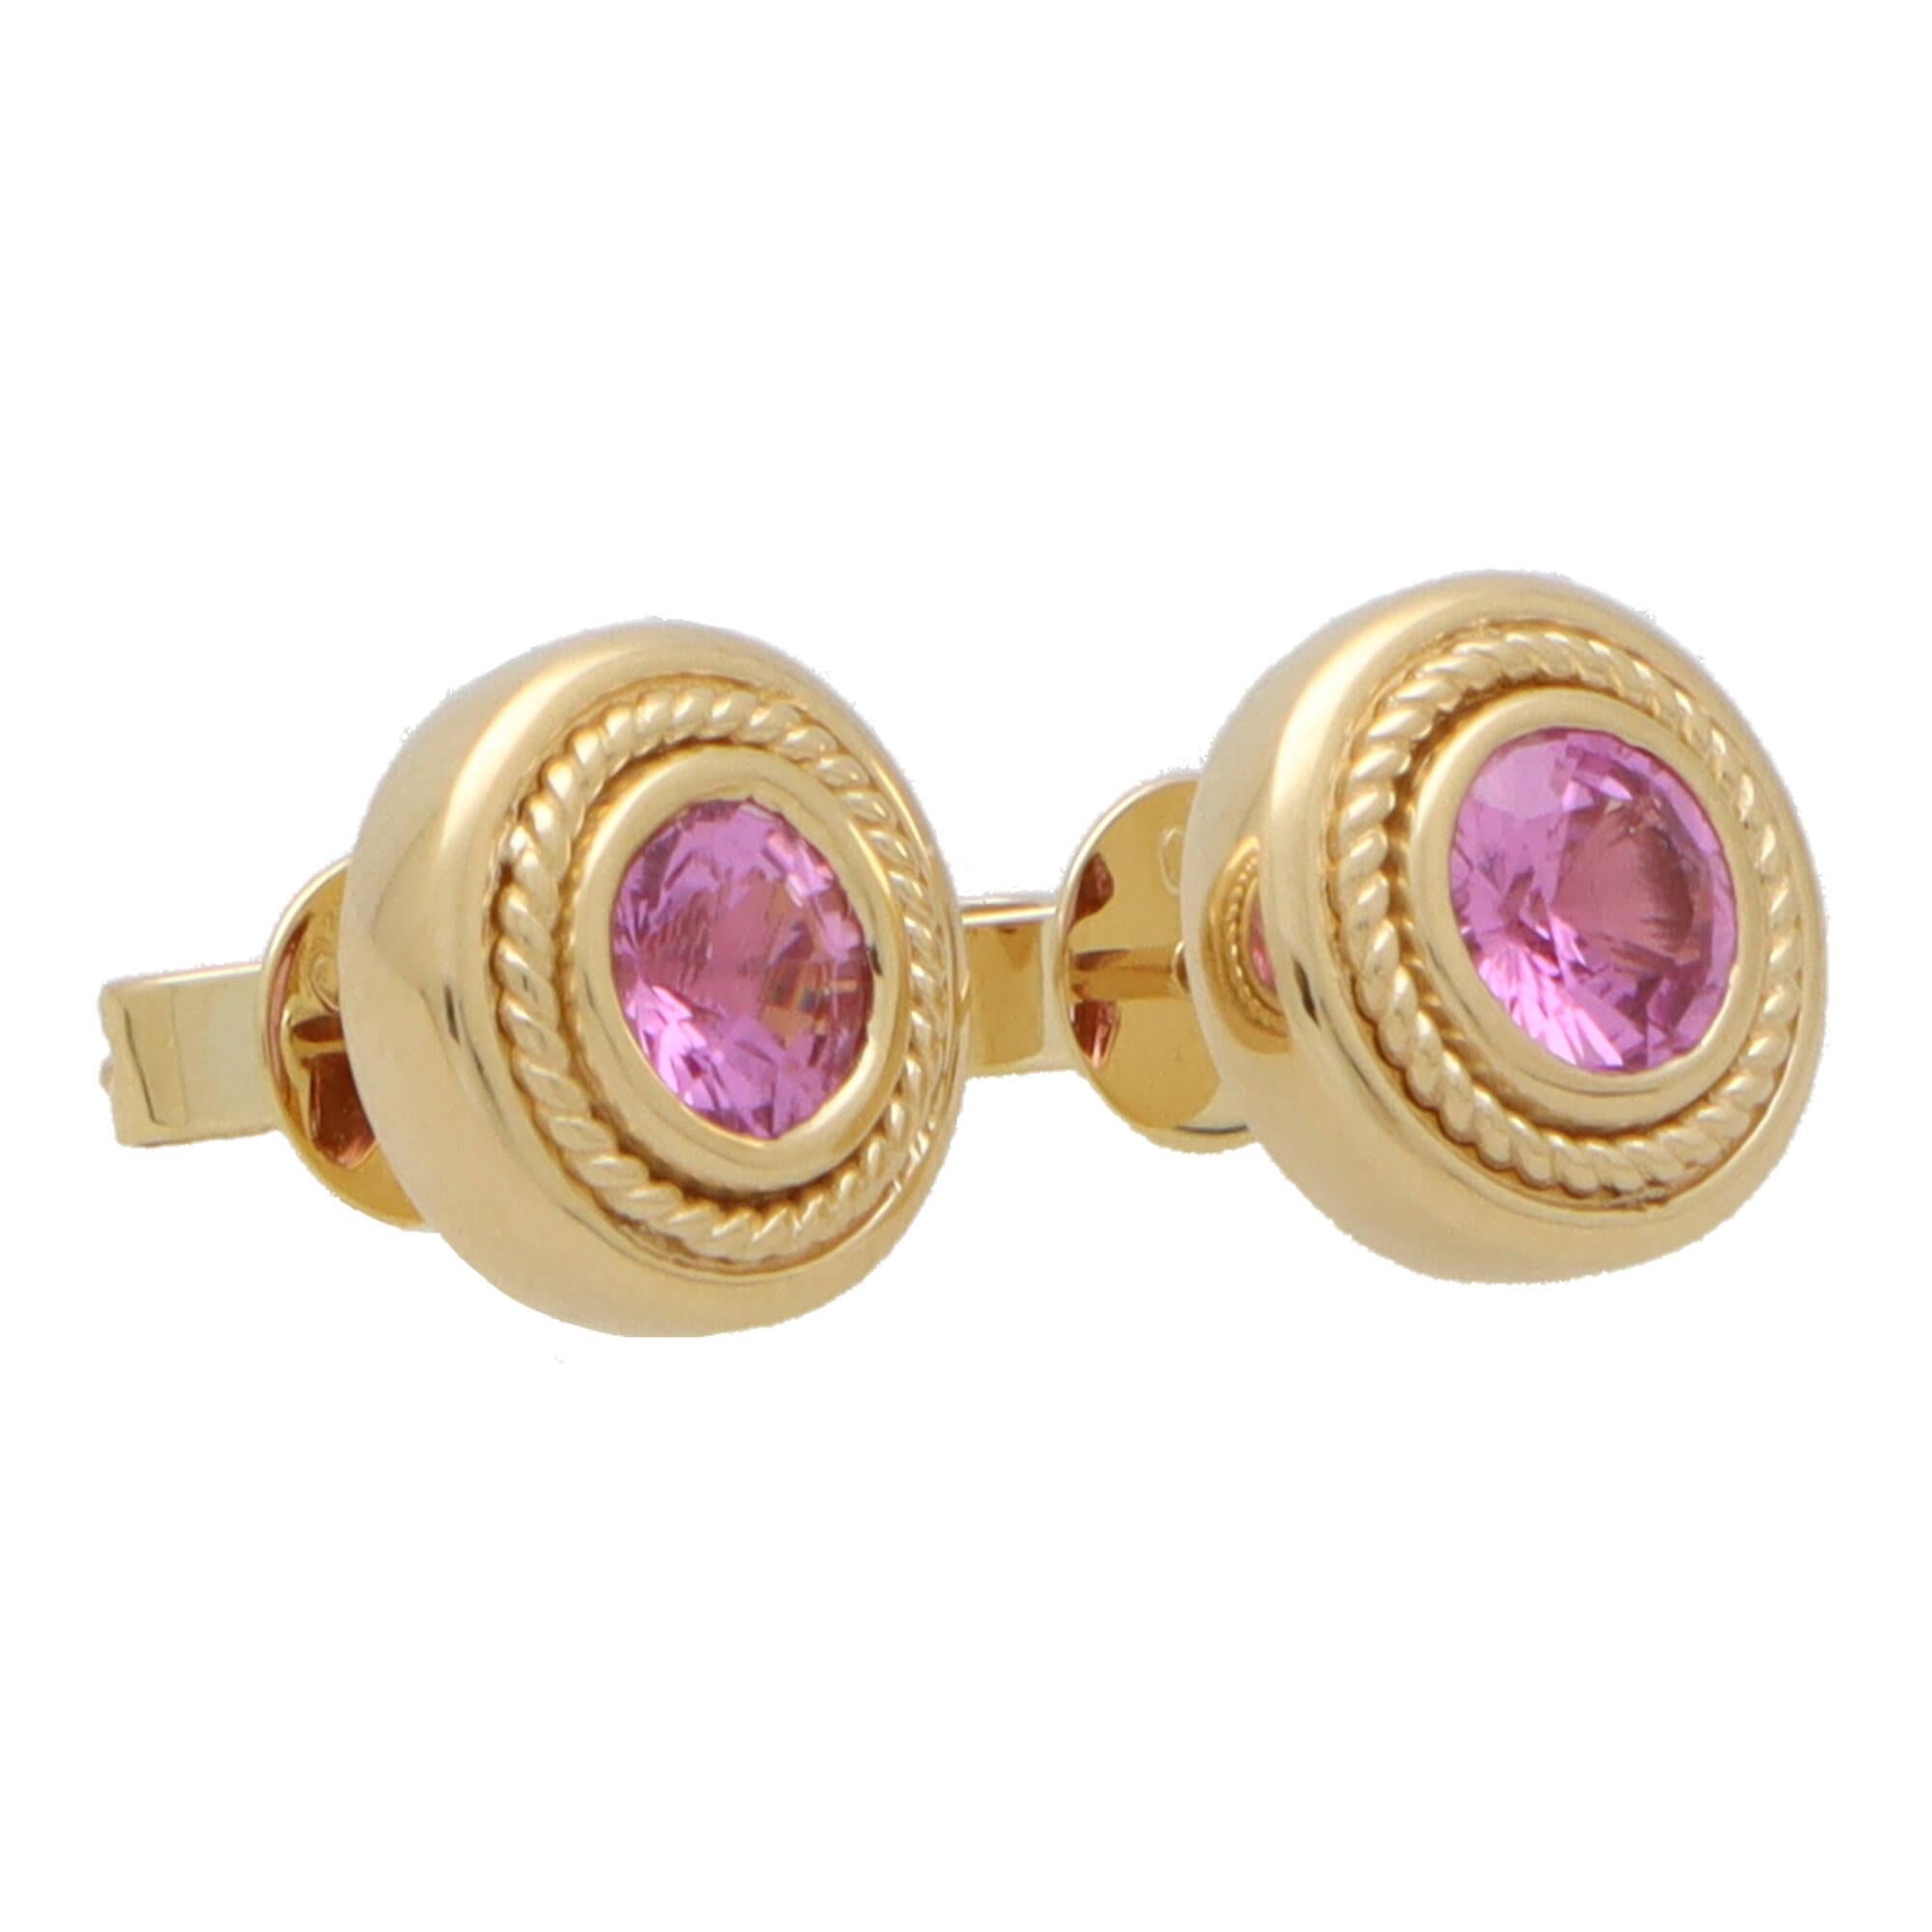 An incredibly stylish pair of Etruscan inspired pink sapphire stud earrings set in 18k yellow gold.

Each earring is solely set with a 0.58 carat round cut pink sapphire which is securely set in a chunky yellow gold rub over setting. The edging